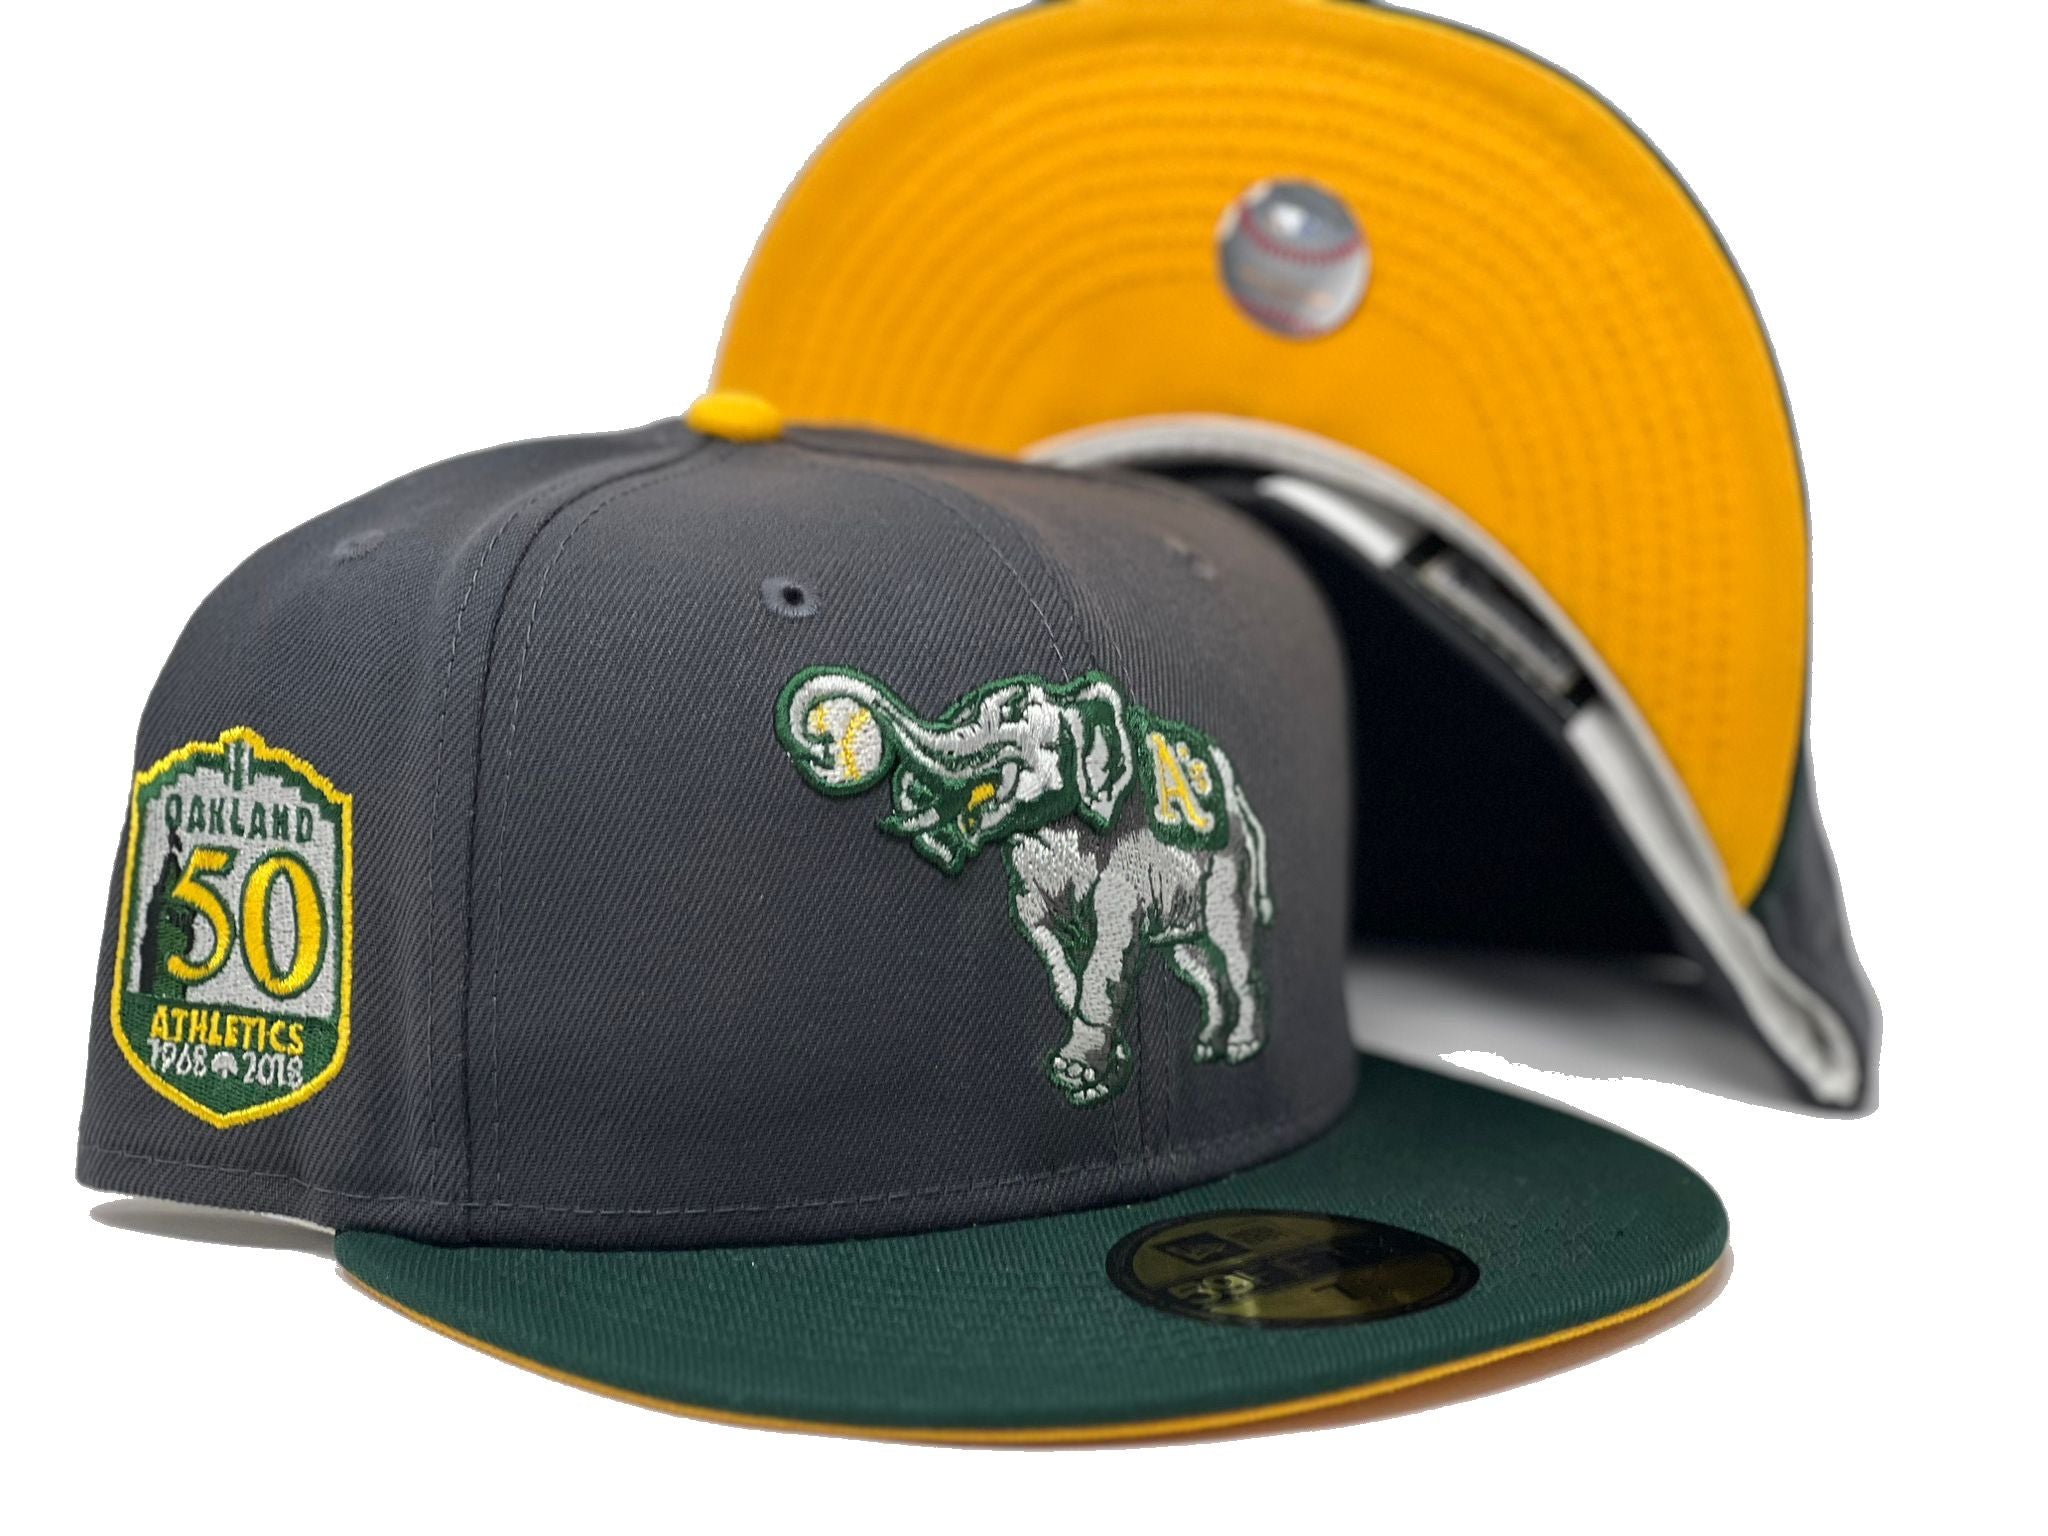 Oakland A's on X: On Wednesdays we wear green and gold